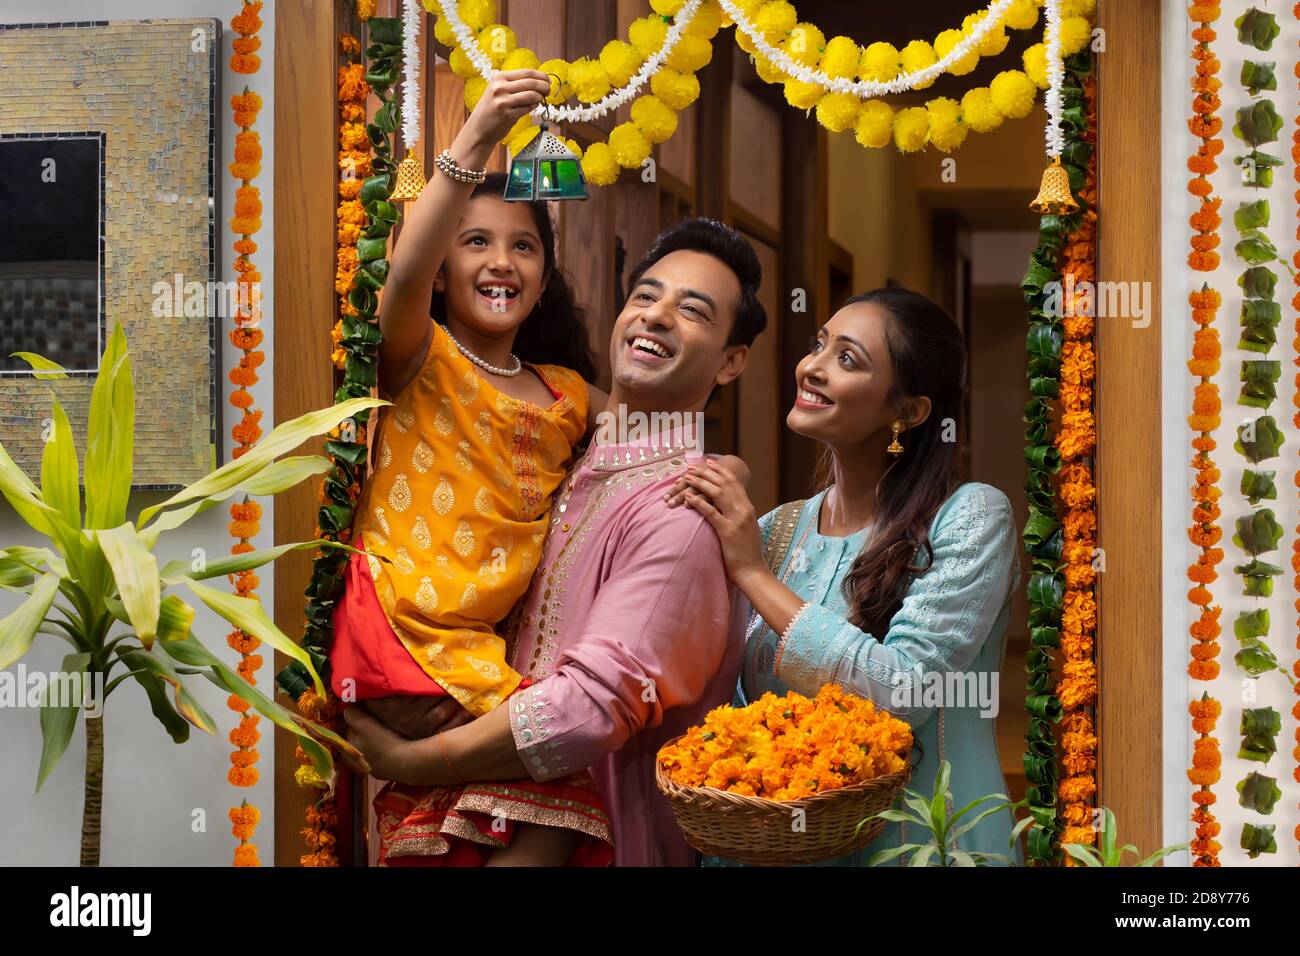 PORTRAIT OF A HAPPY FAMILY LOOKING AT FANCY LANTERN AND POSING IN FRONT OF DECORATED ENTRANCE Stock Photo